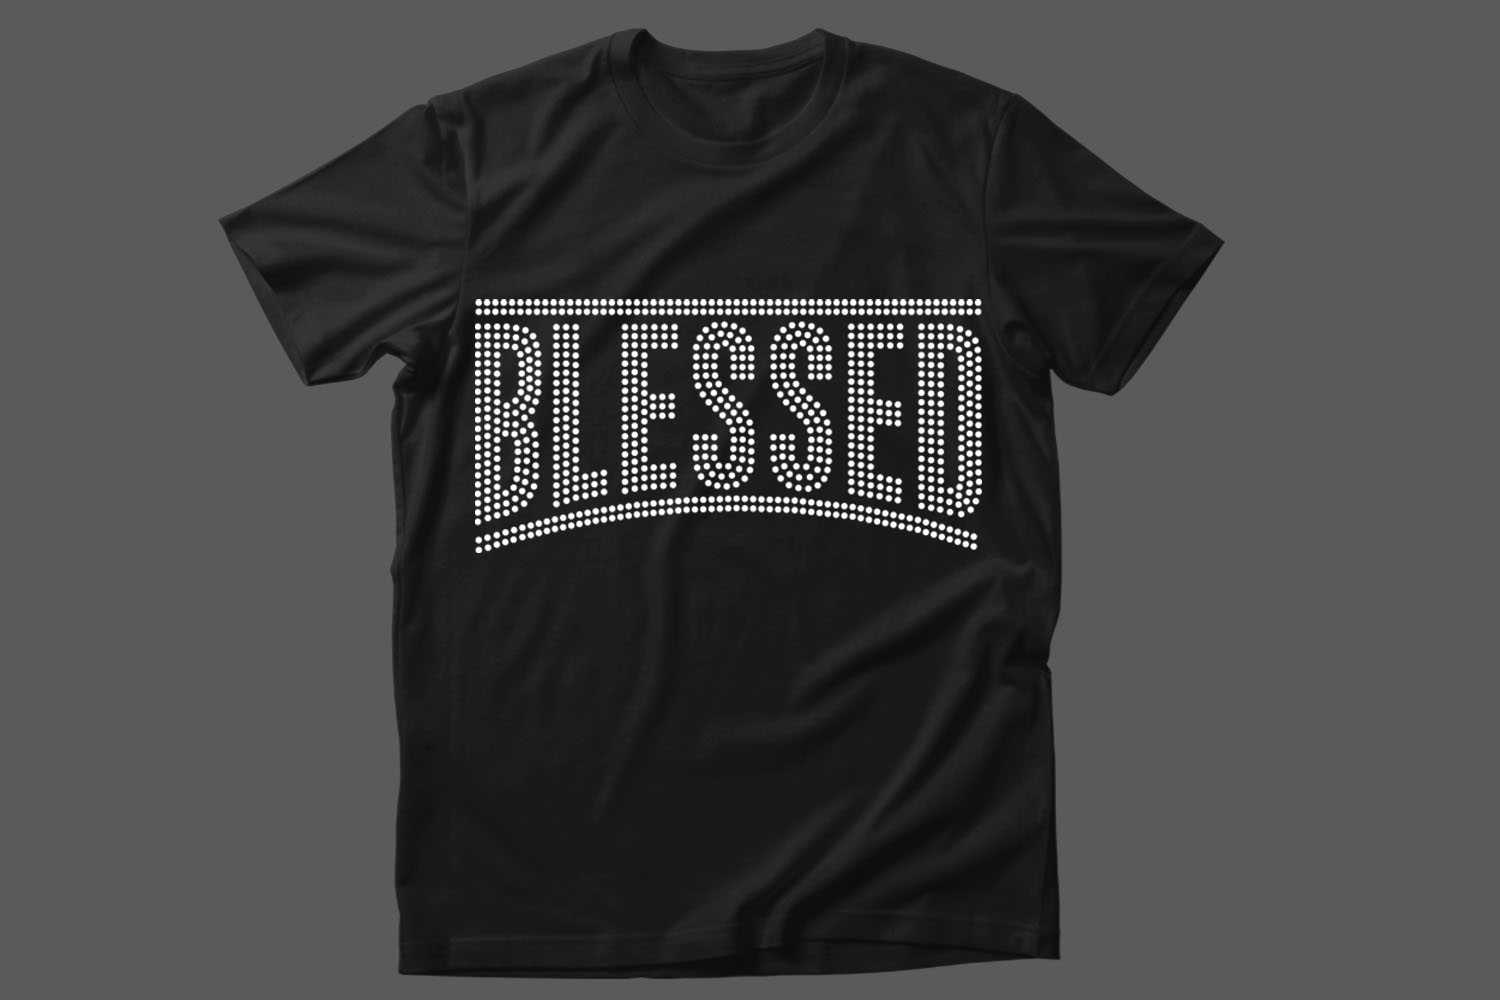 Image of a black T-shirt with an irresistible Blessed slogan